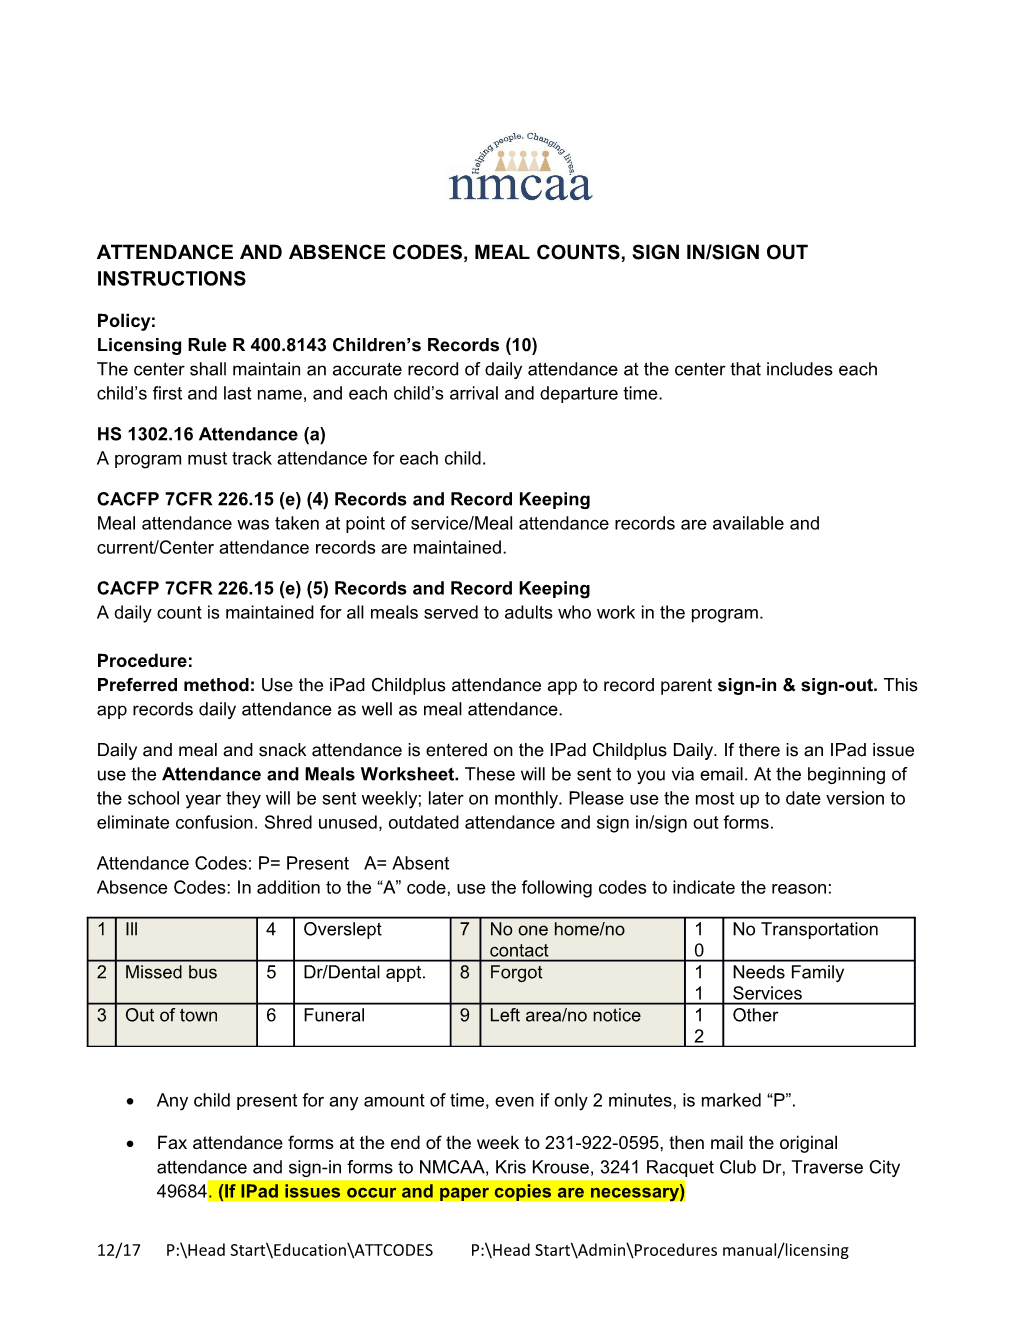 Attendance and Absence Codes, Meal Counts, Sign In/Sign out Instructions